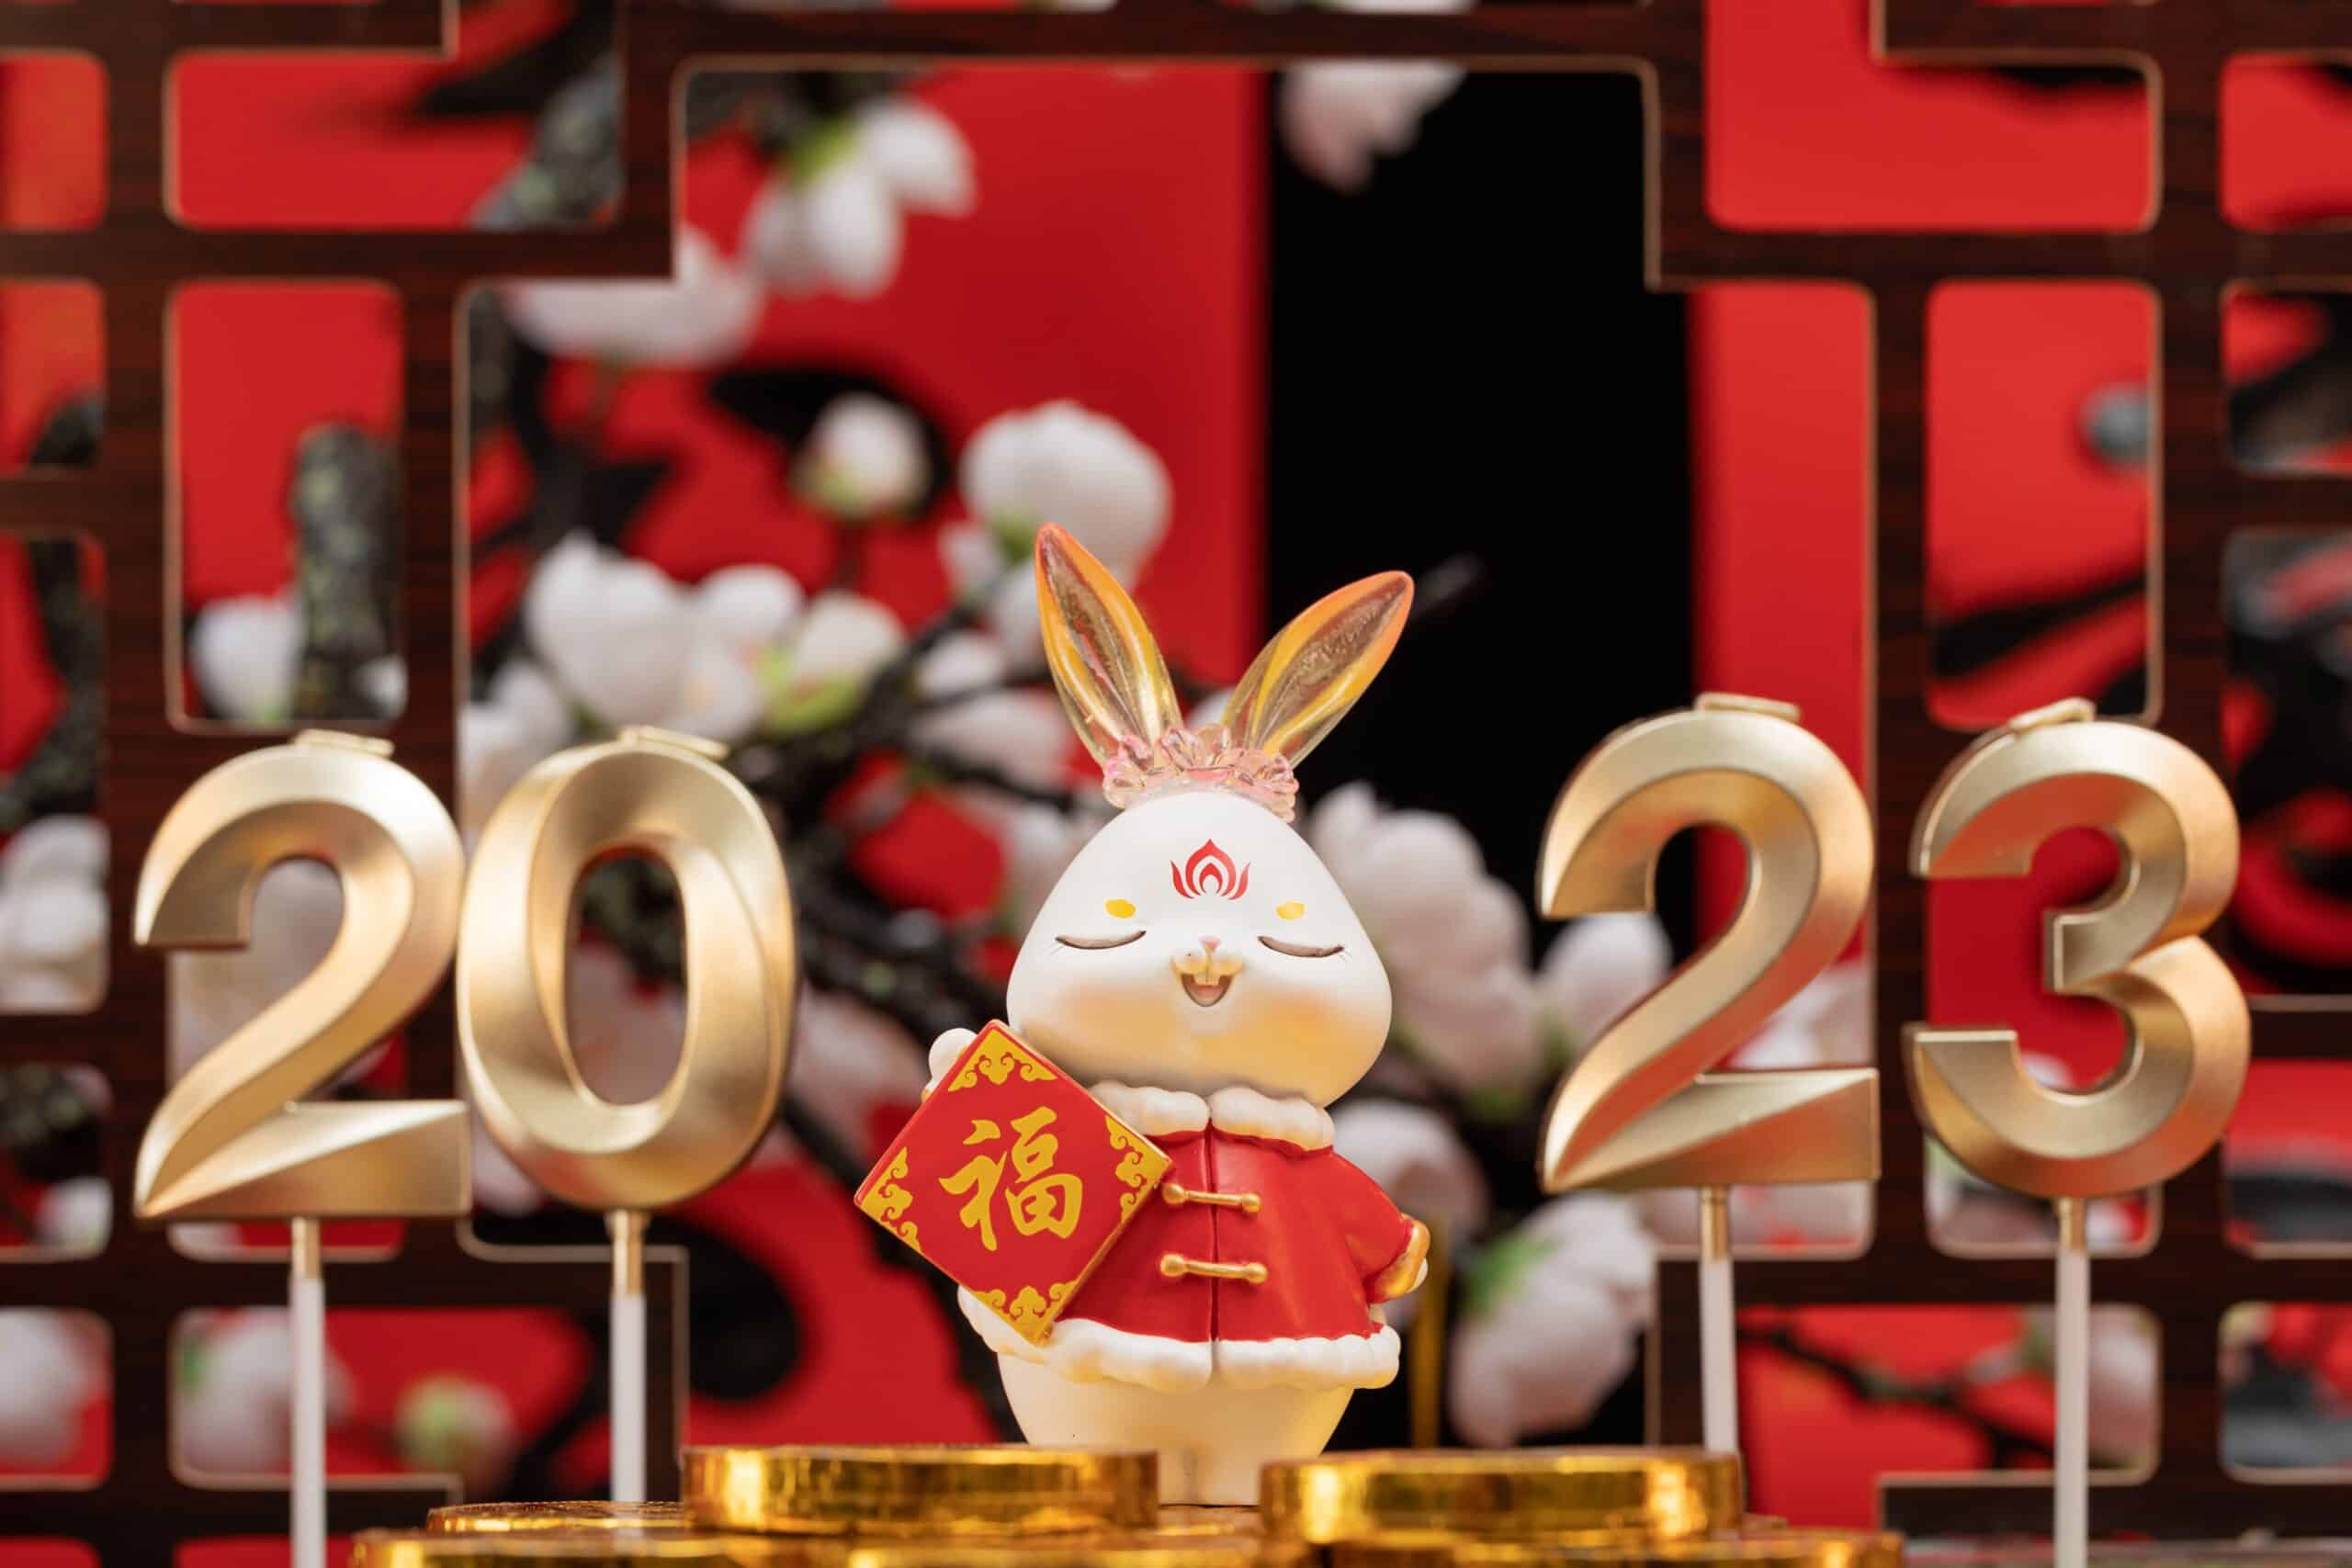 A display for Chinese New Year shows the year 2023 and a happy rabbit statue.